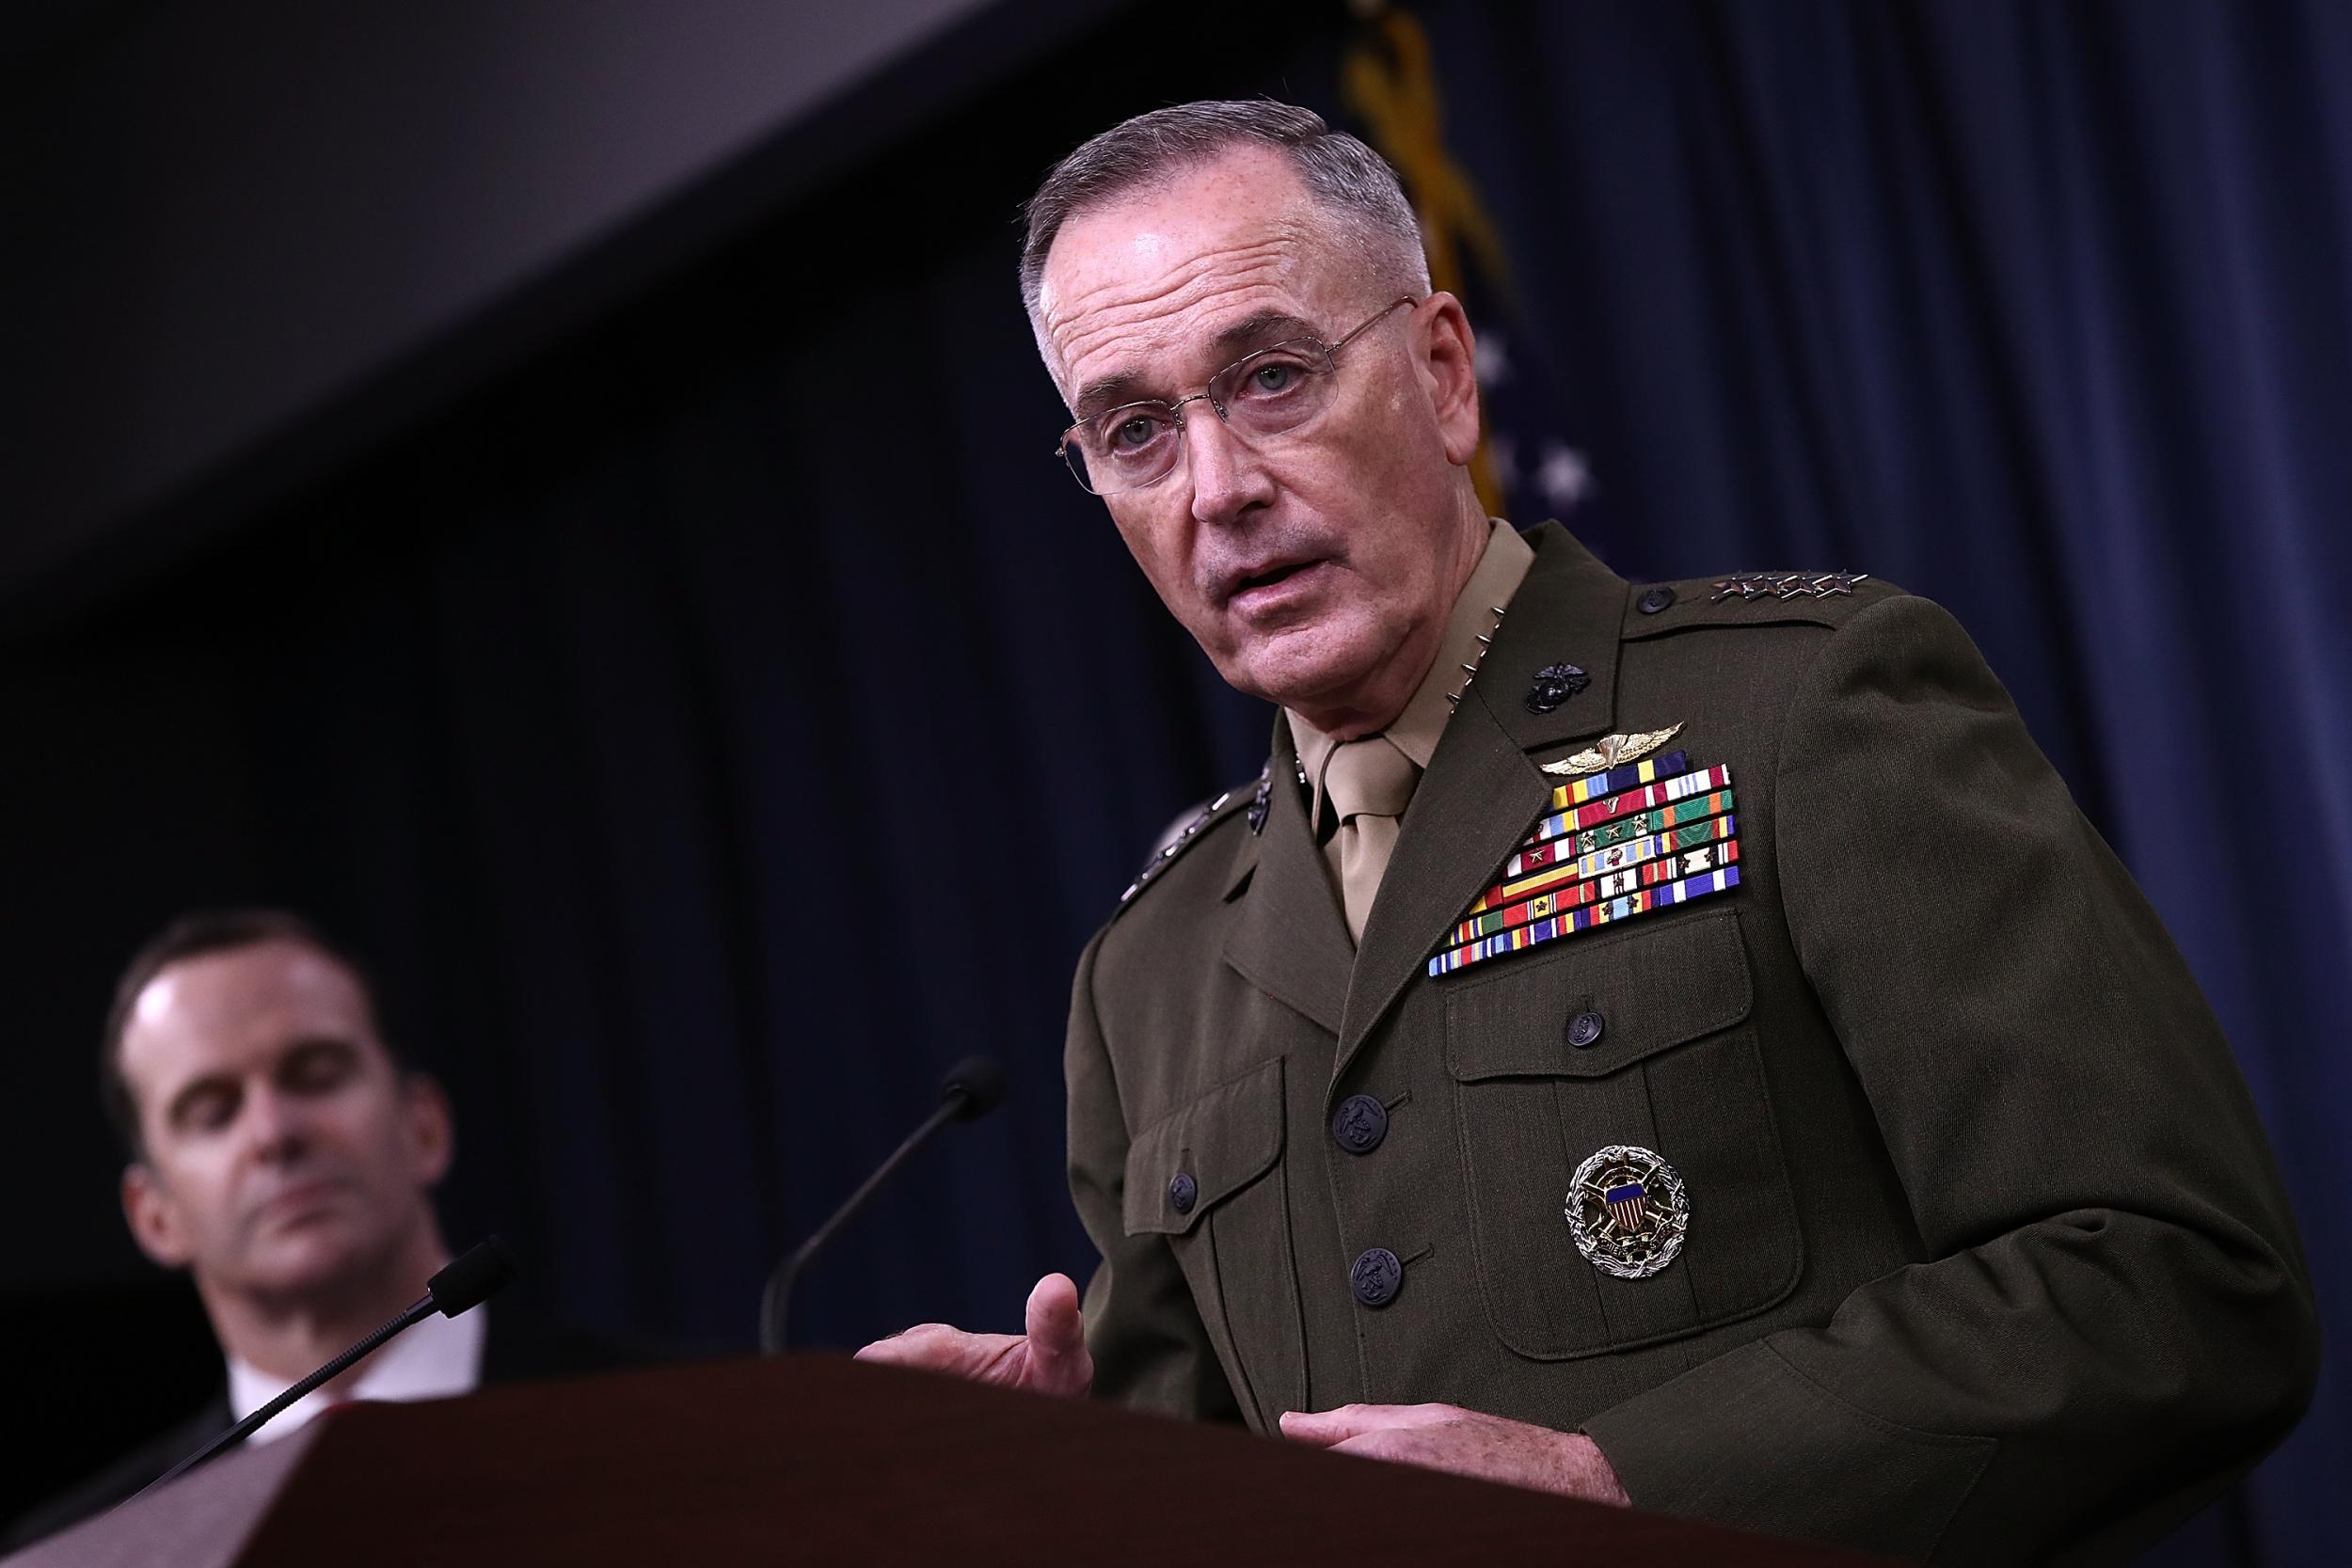 General Joseph Dunford has announced "no modification" to military transgender policy following Donald Trump's tweets